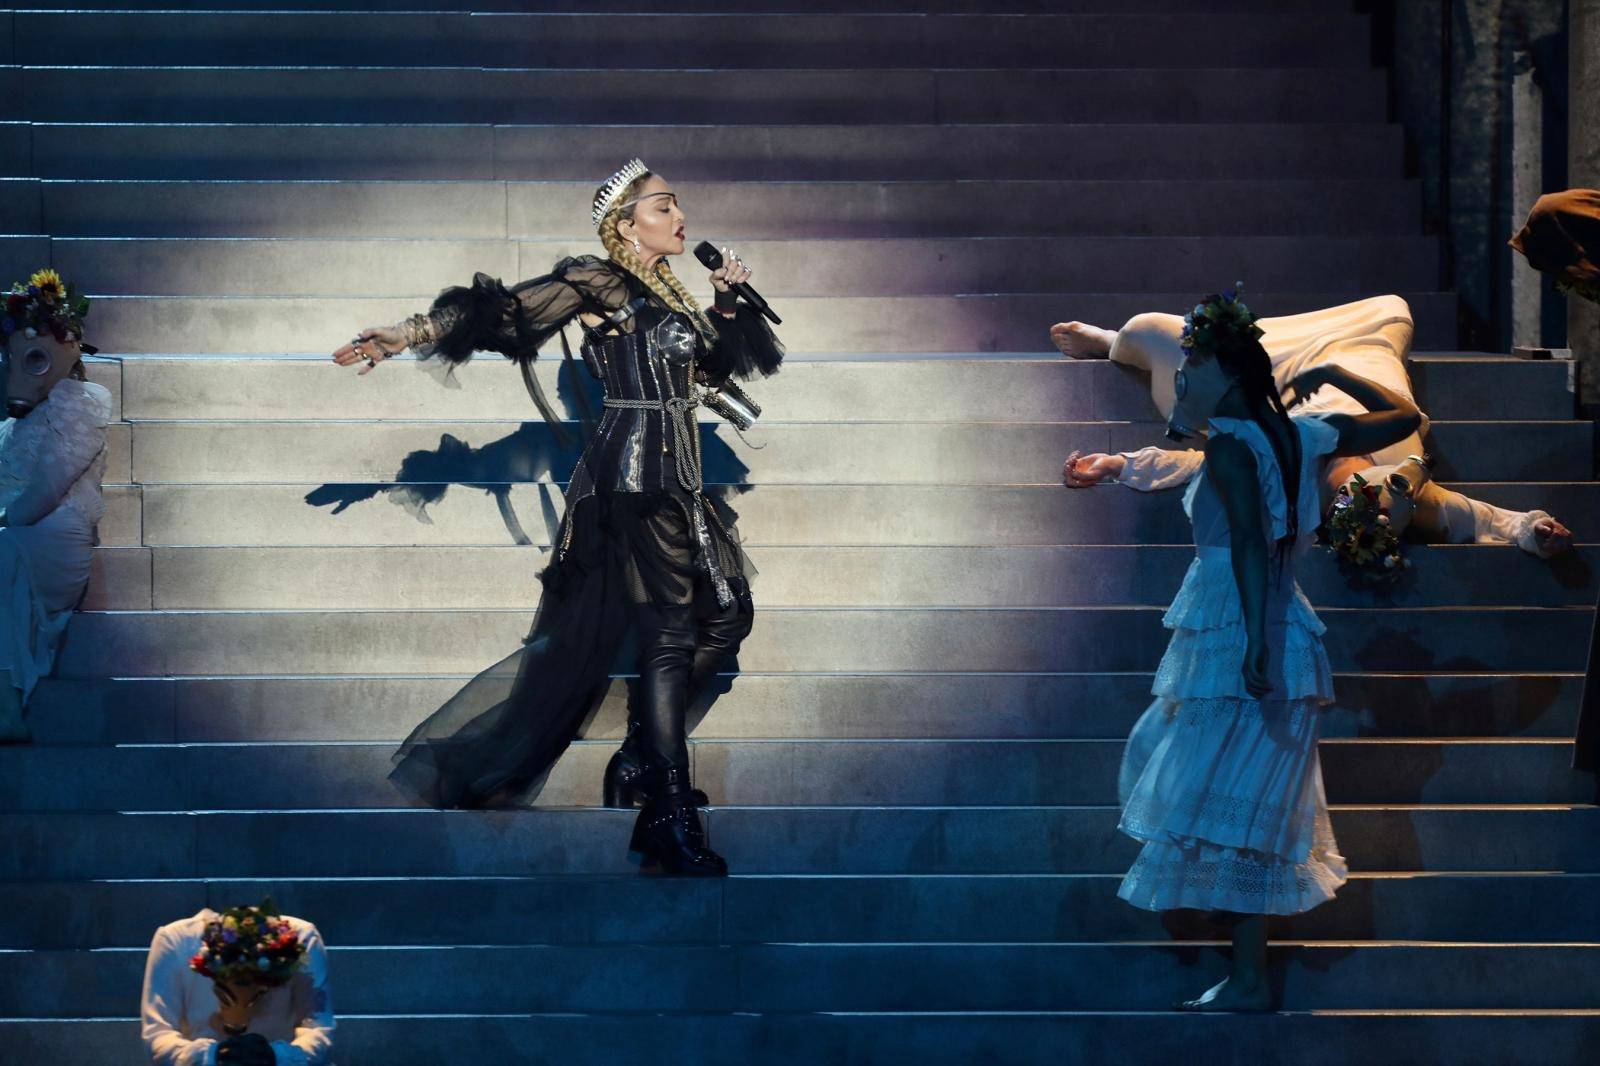 Madonna performs during a guest appearance at the Grand Final of the 2019 Eurovision Song Contest in Tel Aviv, Israel